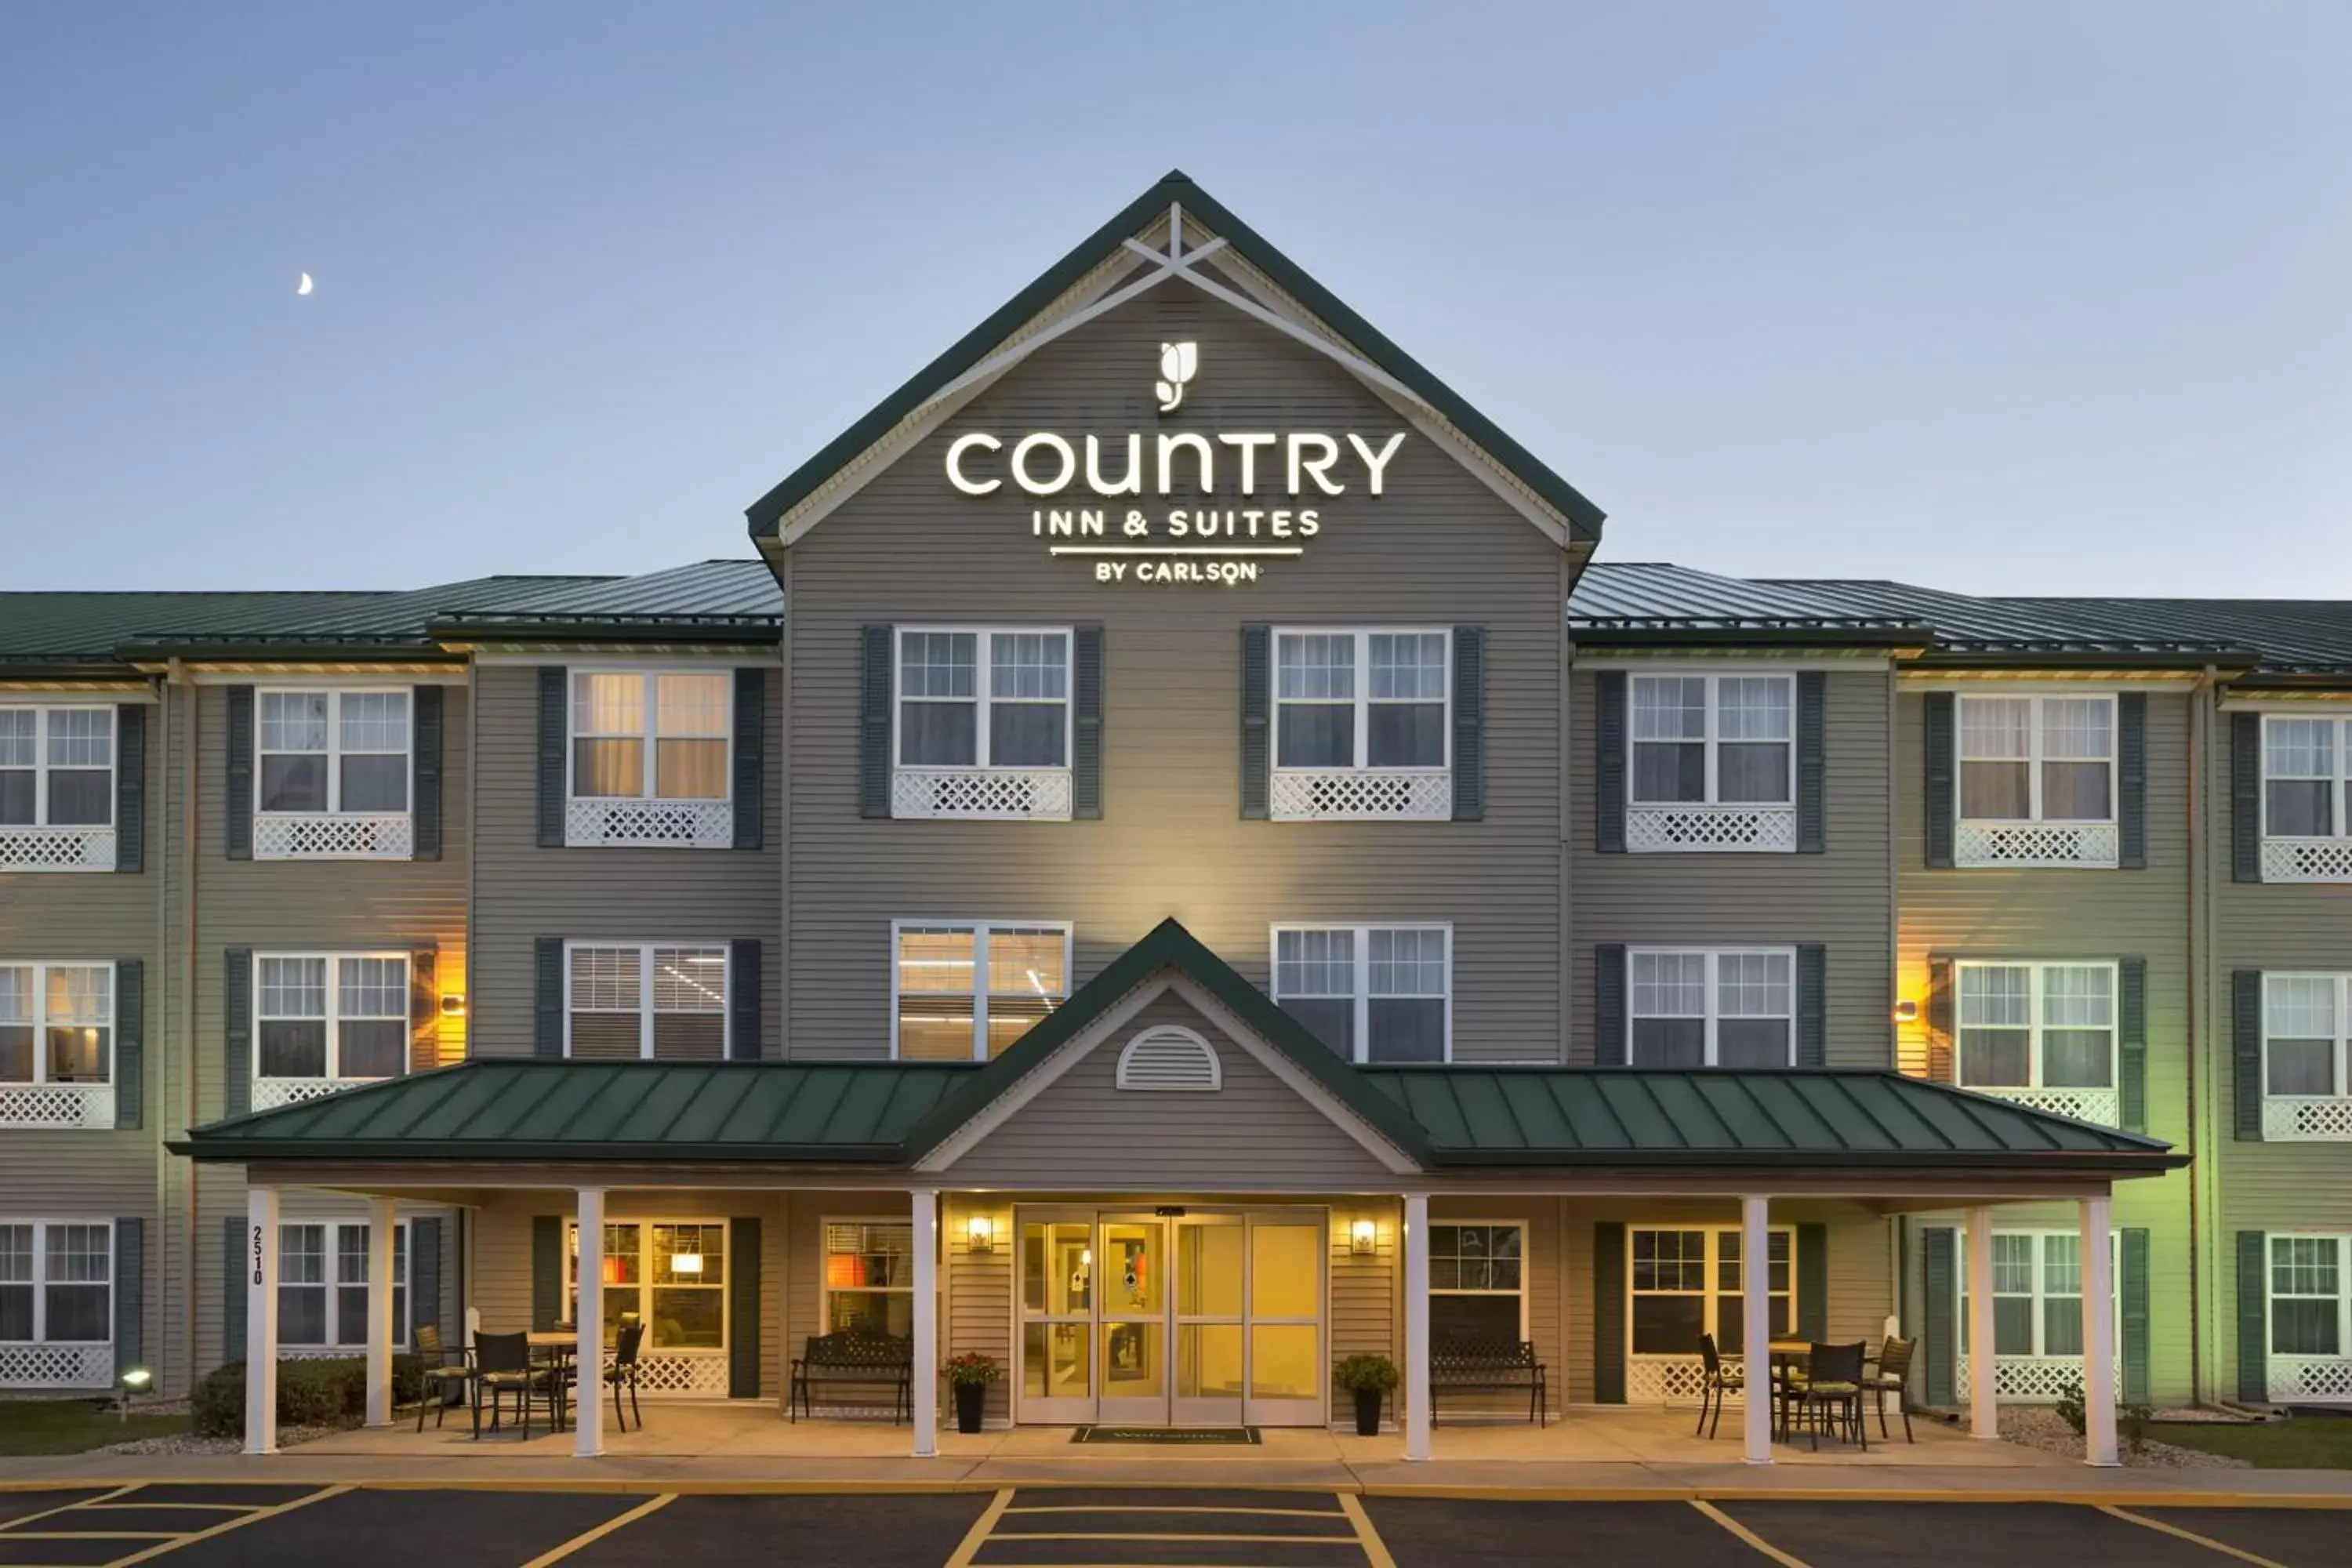 Facade/entrance, Property Building in Country Inn & Suites by Radisson, Ankeny, IA